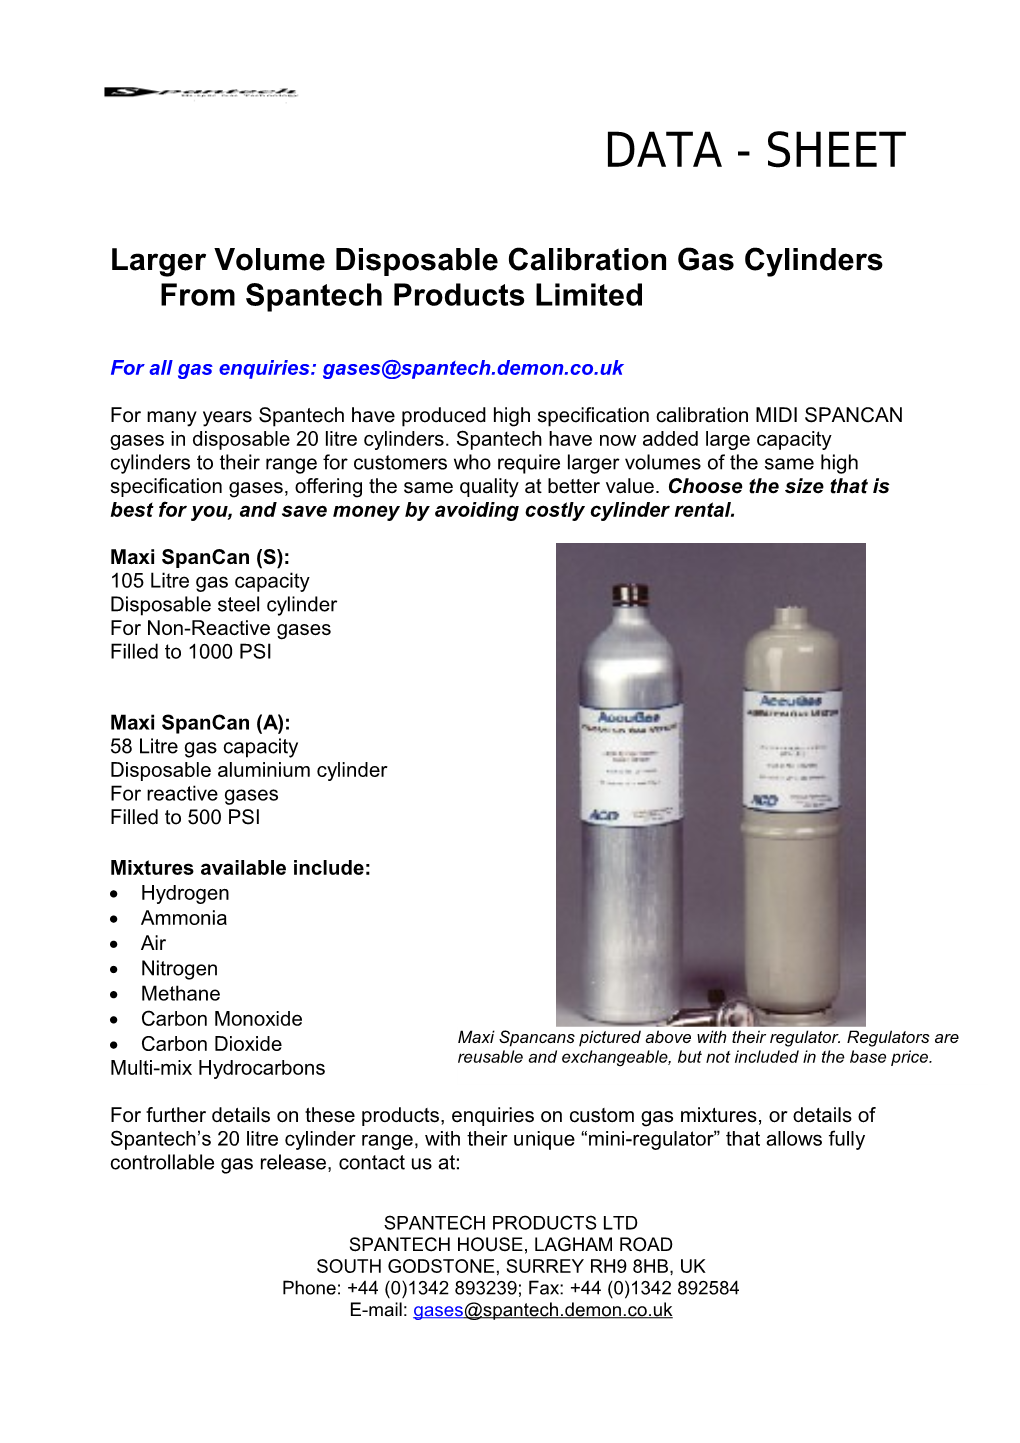 Larger Volume Disposable Calibration Gas Cylinders from Spantech Products Limited